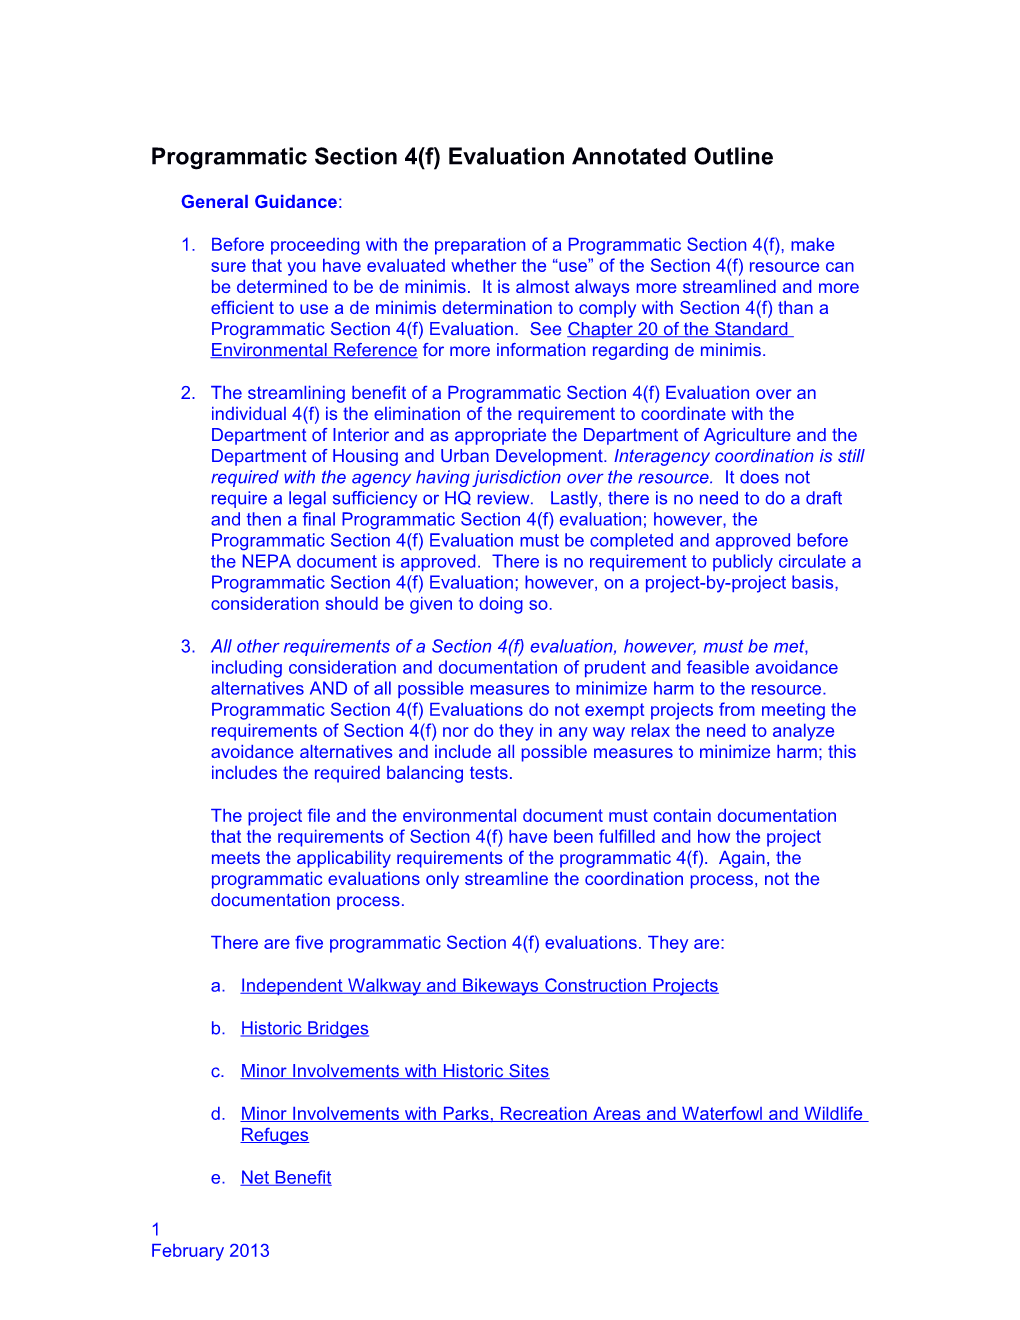 Programmatic Section 4(F)Evaluation Annotated Outline